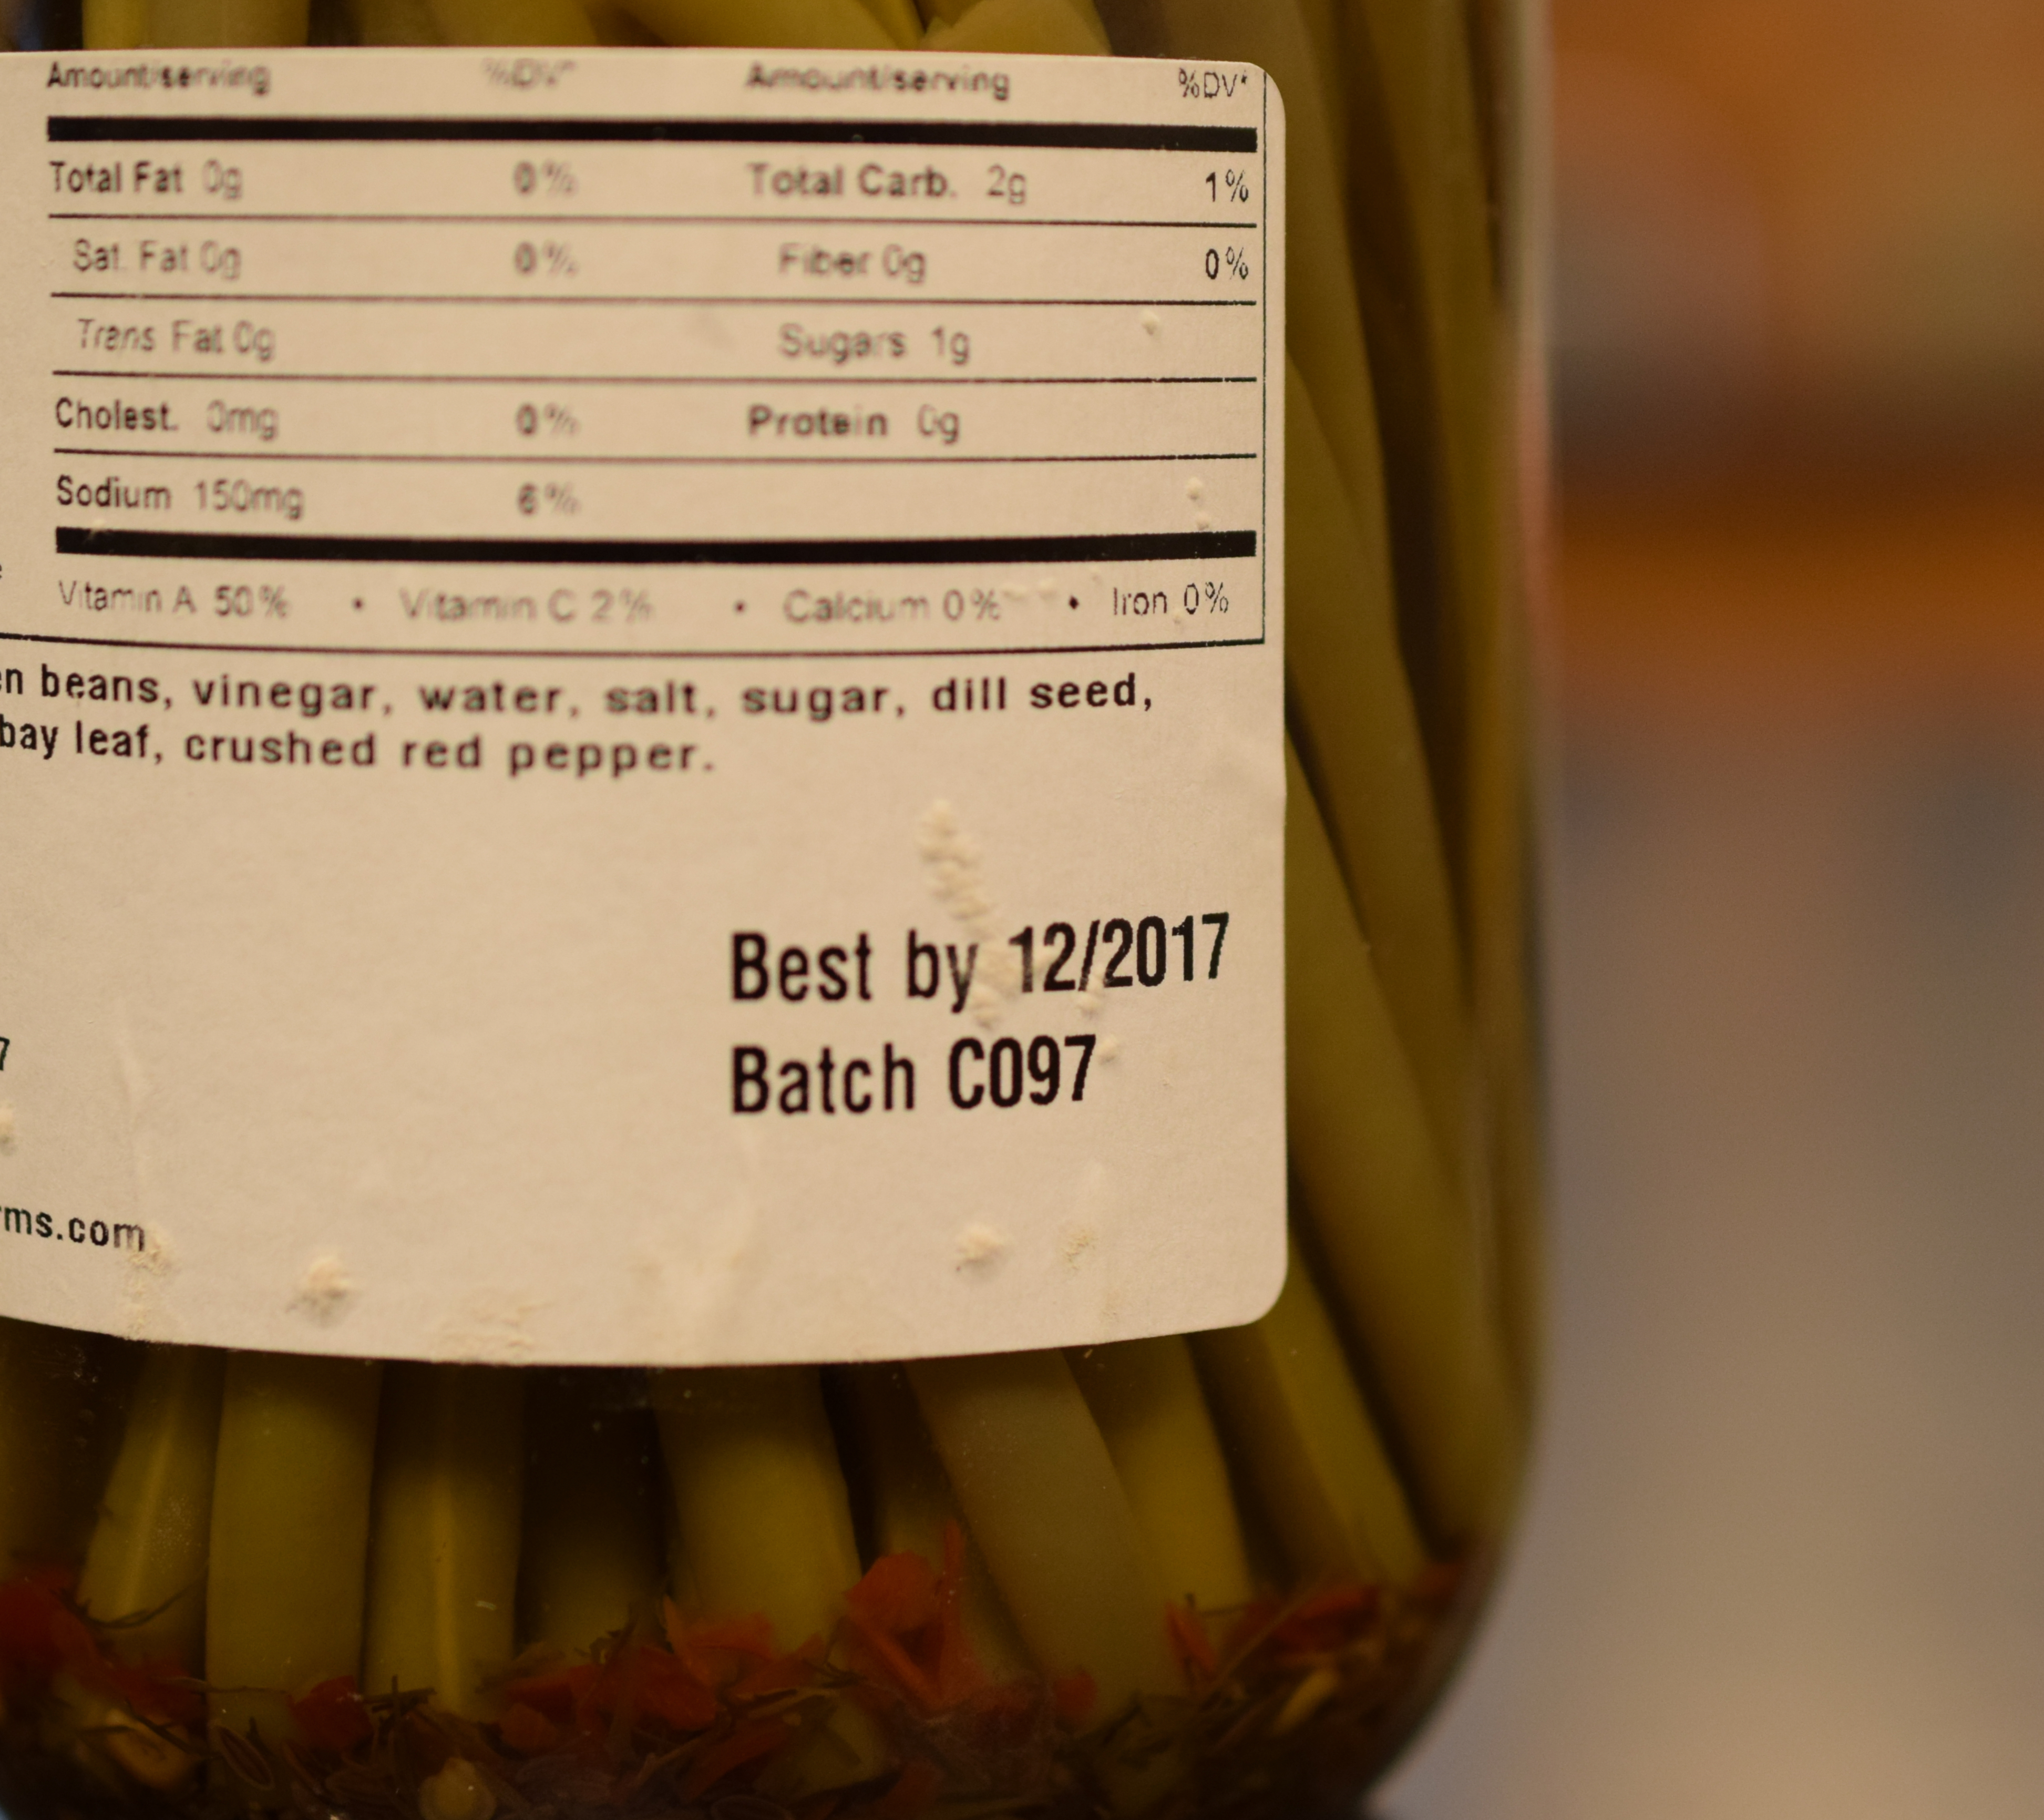 Label on a jar of pickled green beans that says "Best by 12/2017" and "Batch C097"